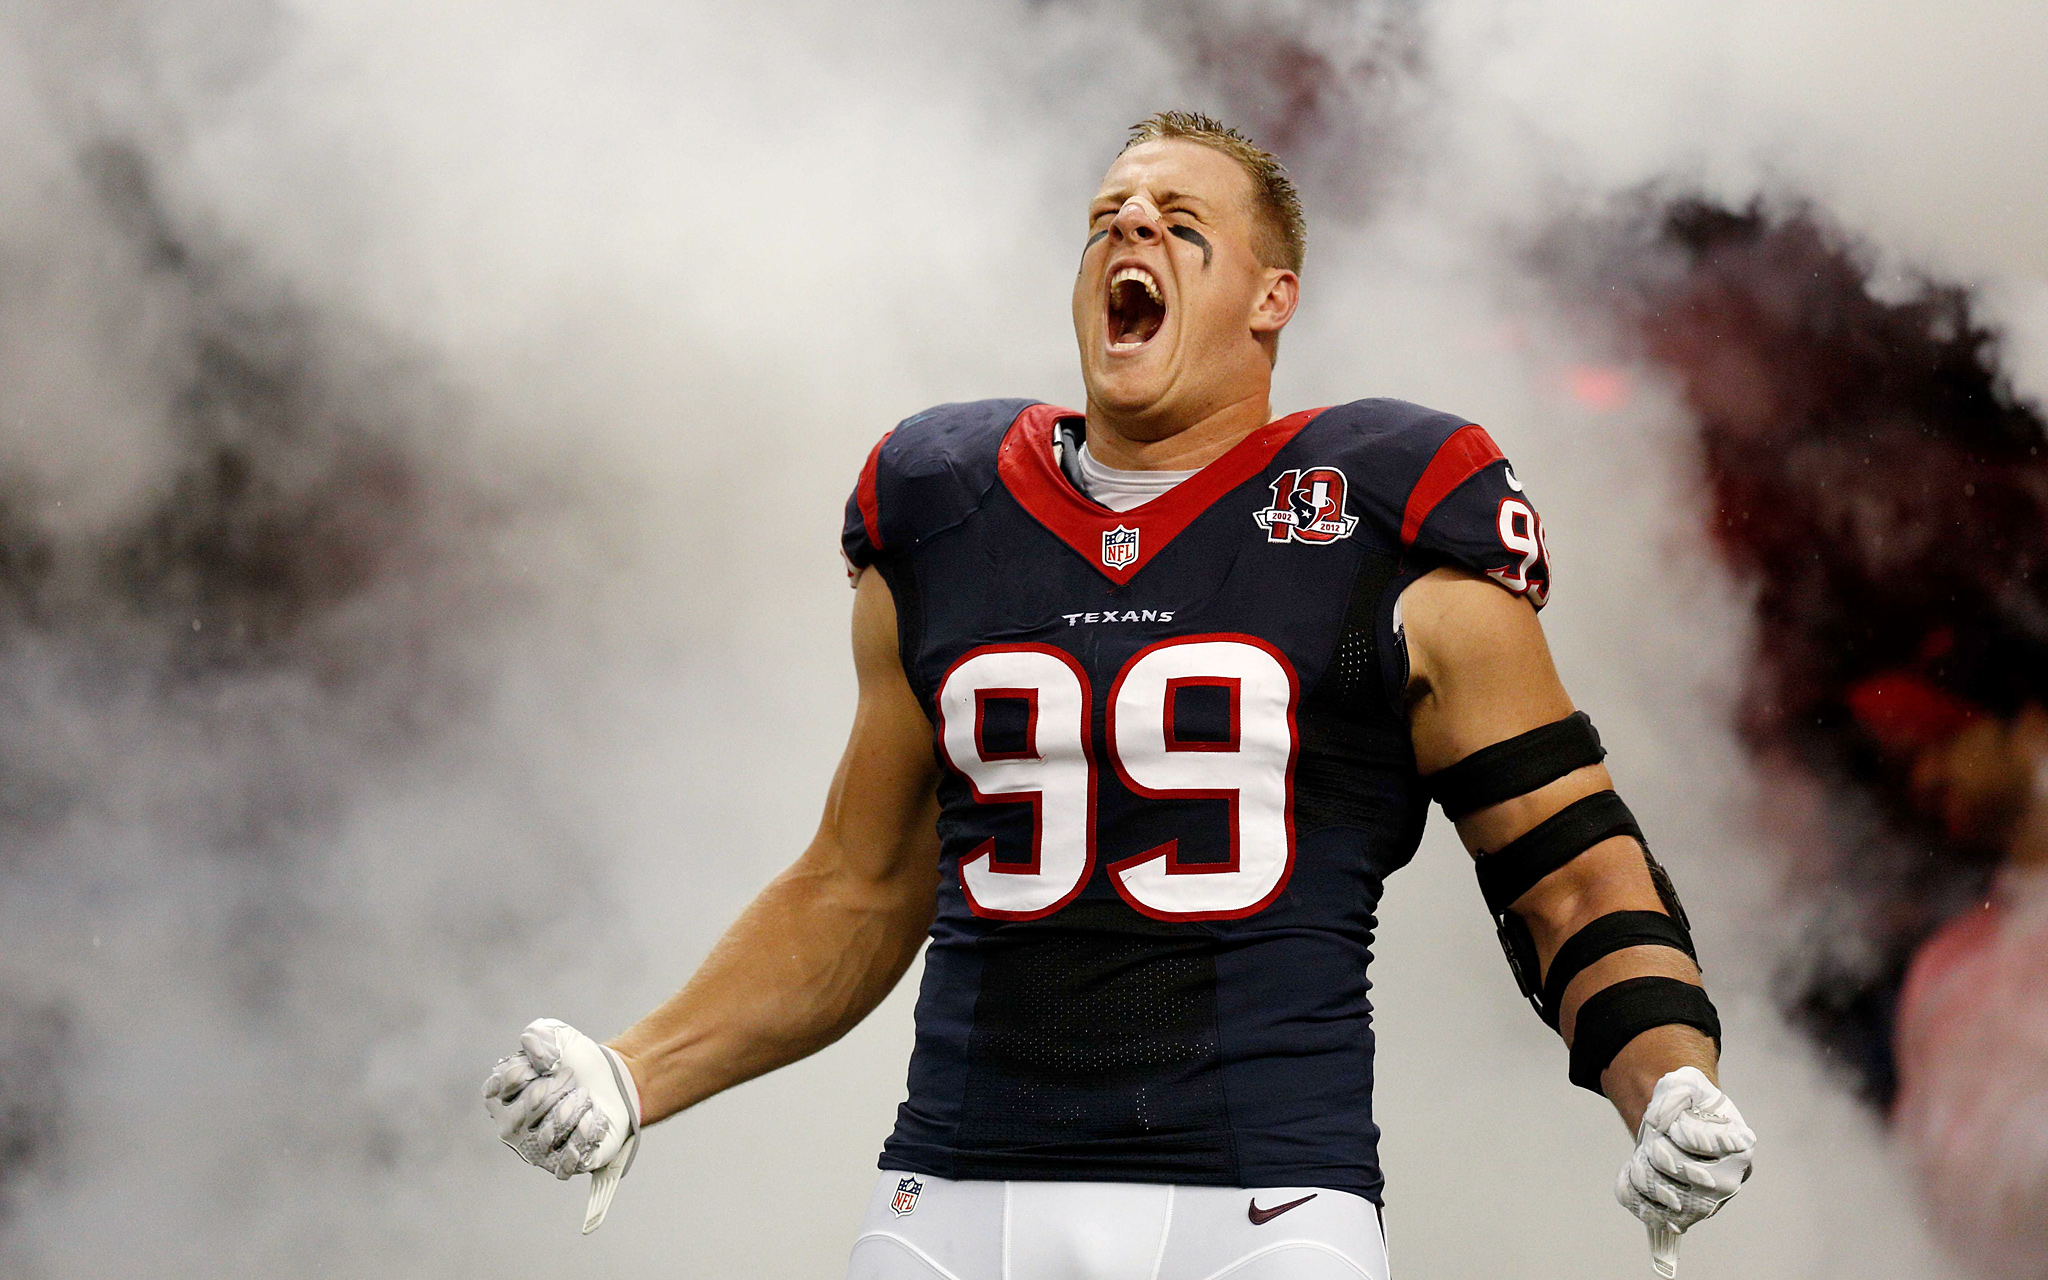 Jj Watt Just Cashed Out According To S The Texans De Is About